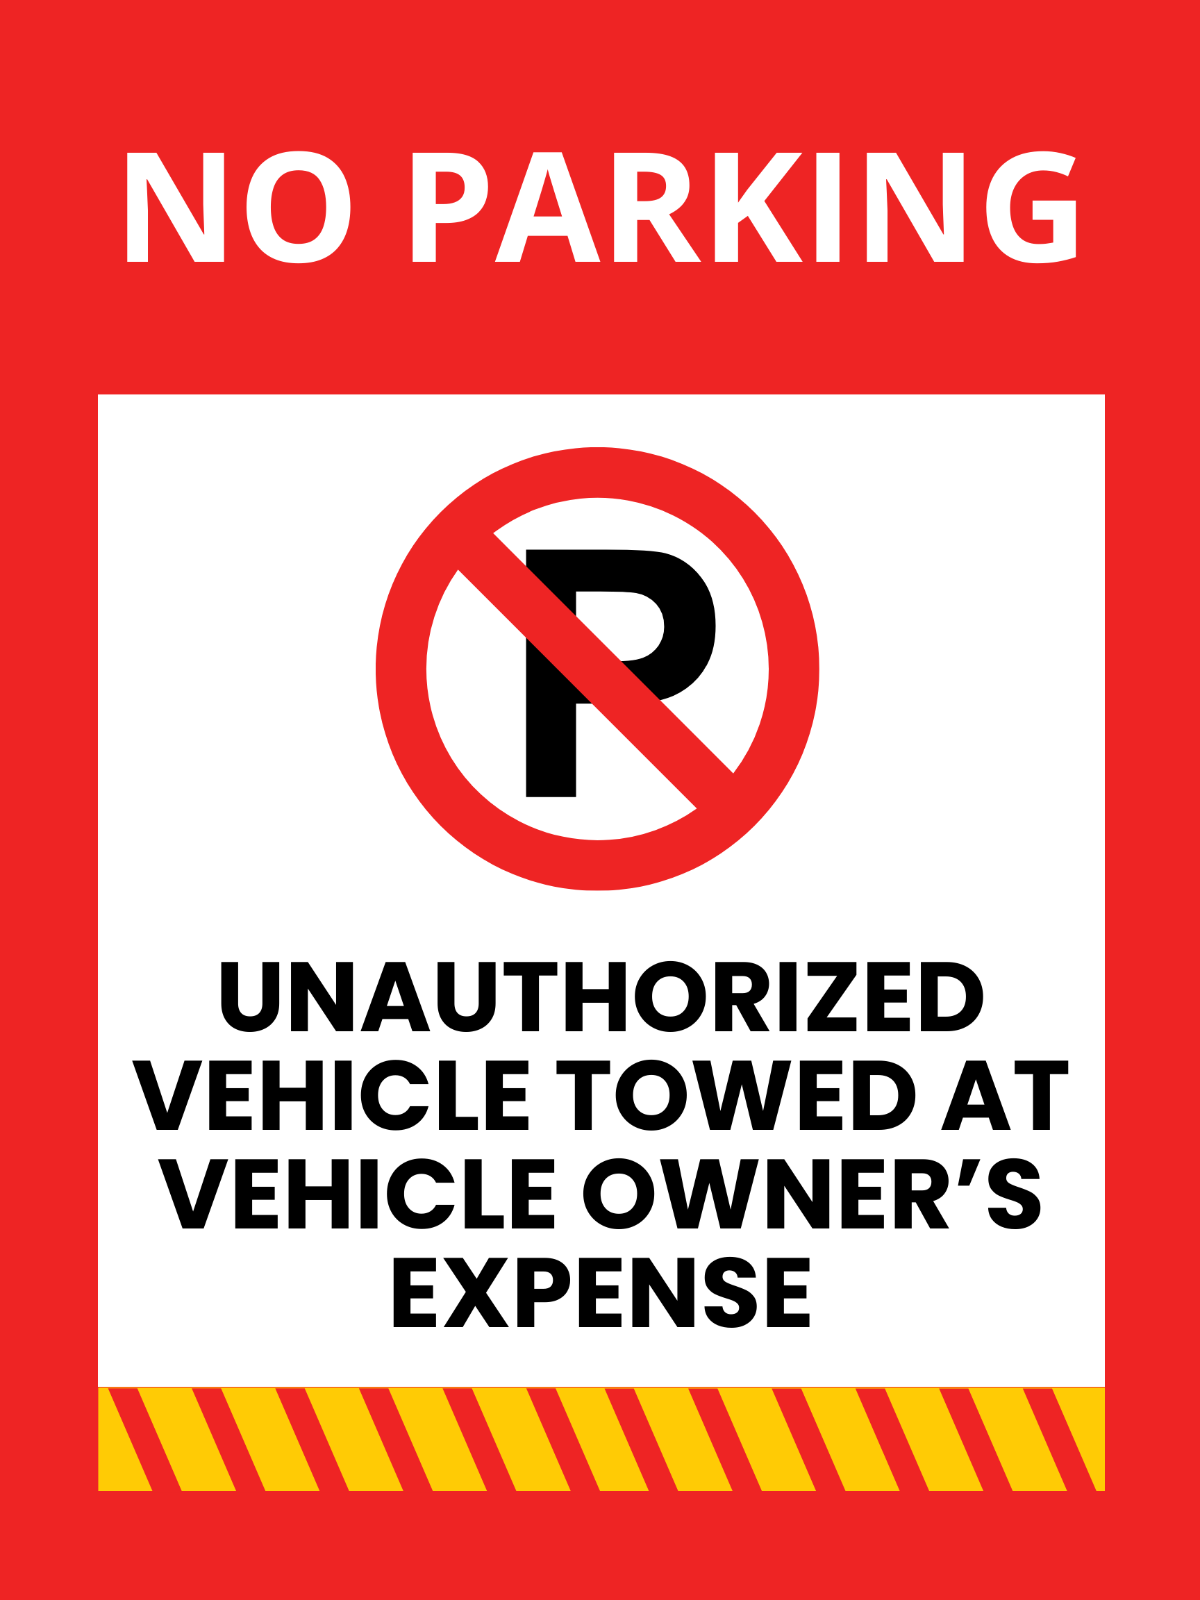 Construction Site Parking Sign Template